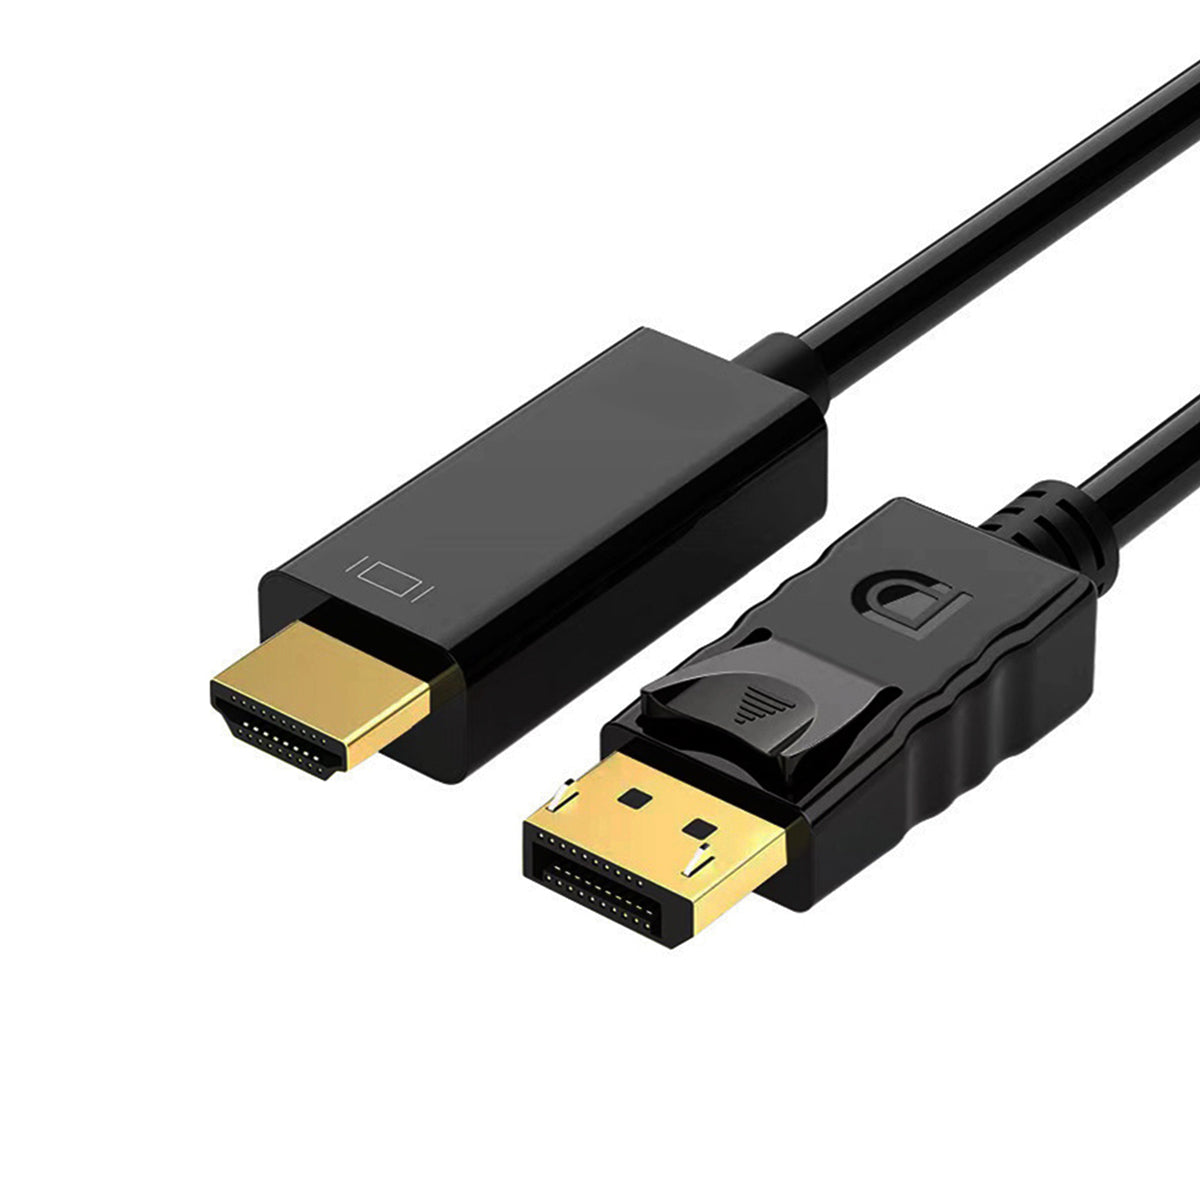 Verilux DP to Hdmi Cable 6FT DisplayPort to HDMI Male Cable Gold-Plated, 1080P DP to HDTV Uni-Directional Cord for Dell, Monitor, Projector, Desktop, AMD, NVIDIA, Lenovo, HP, ThinkPad - verilux